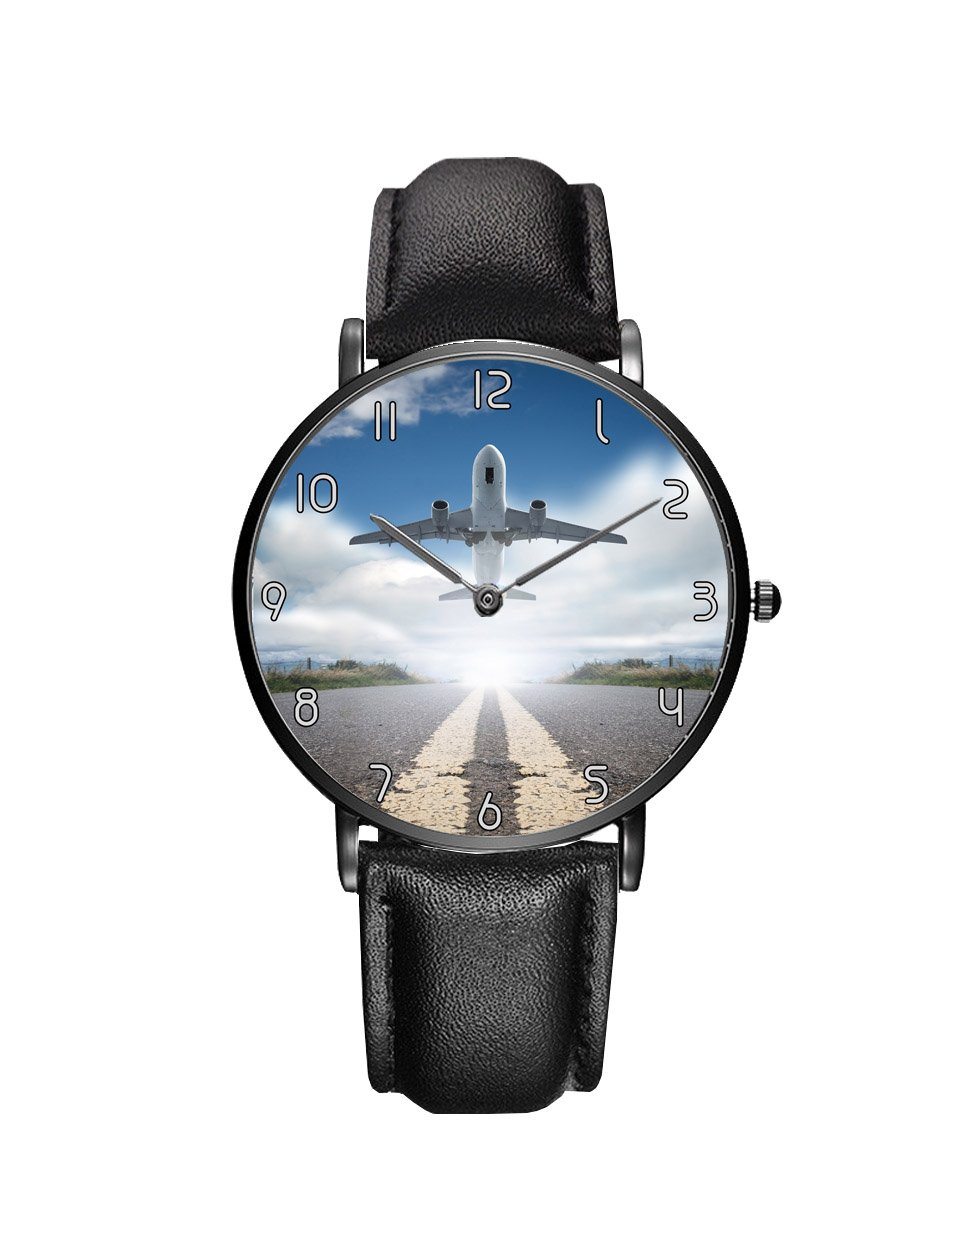 Taking Off Aircraft Printed Leather Strap Watches Aviation Shop Black & Black Leather Strap 